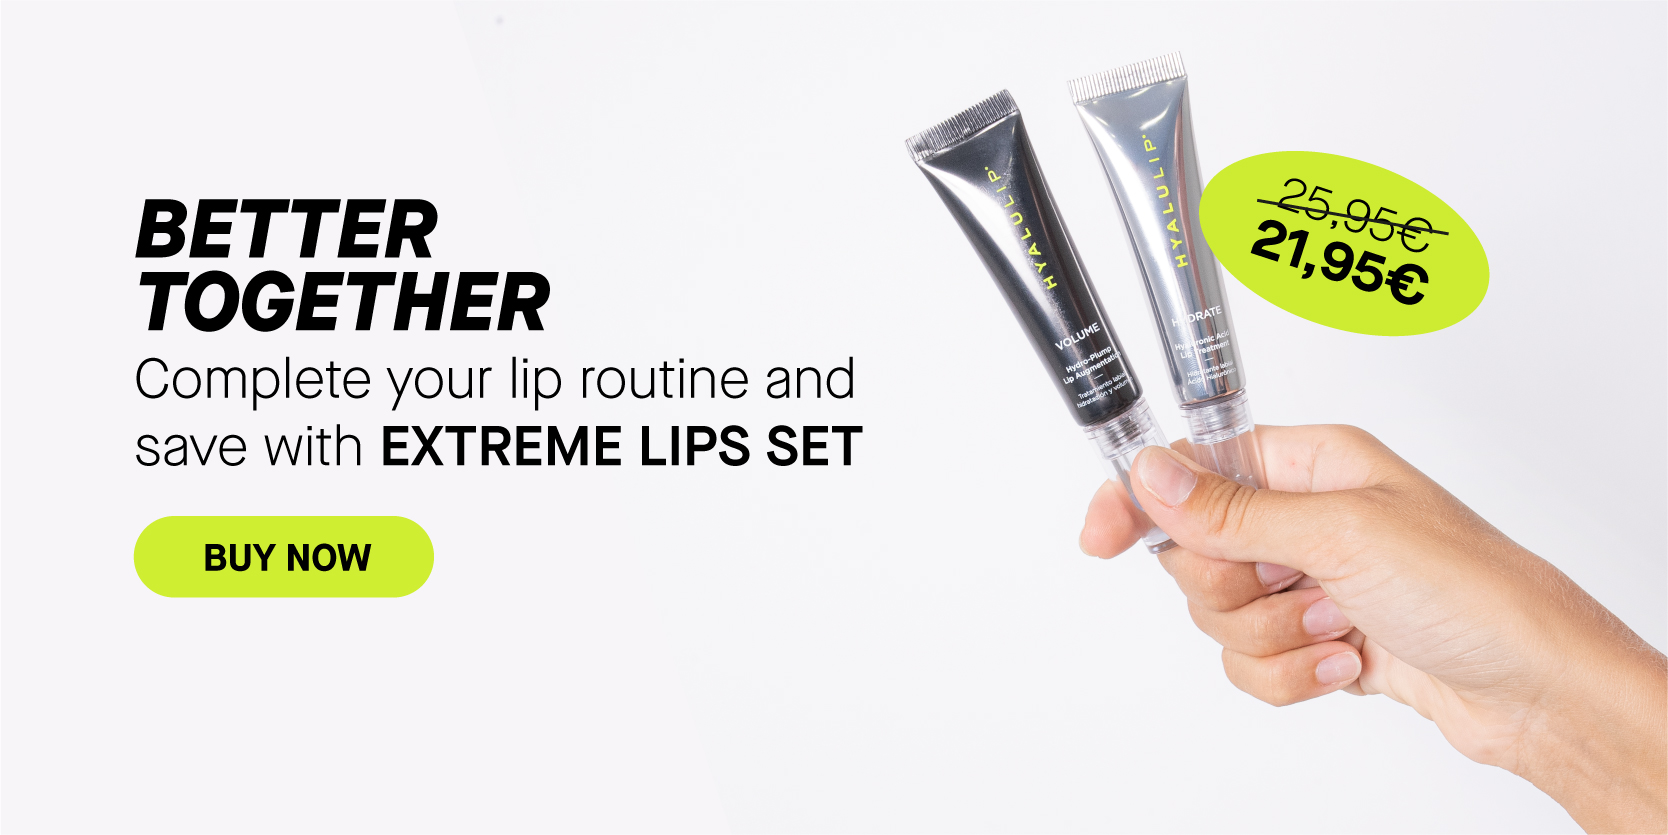 BETTER TOGETHER Complete your lip routine and save with EXTREME LIPS SET 